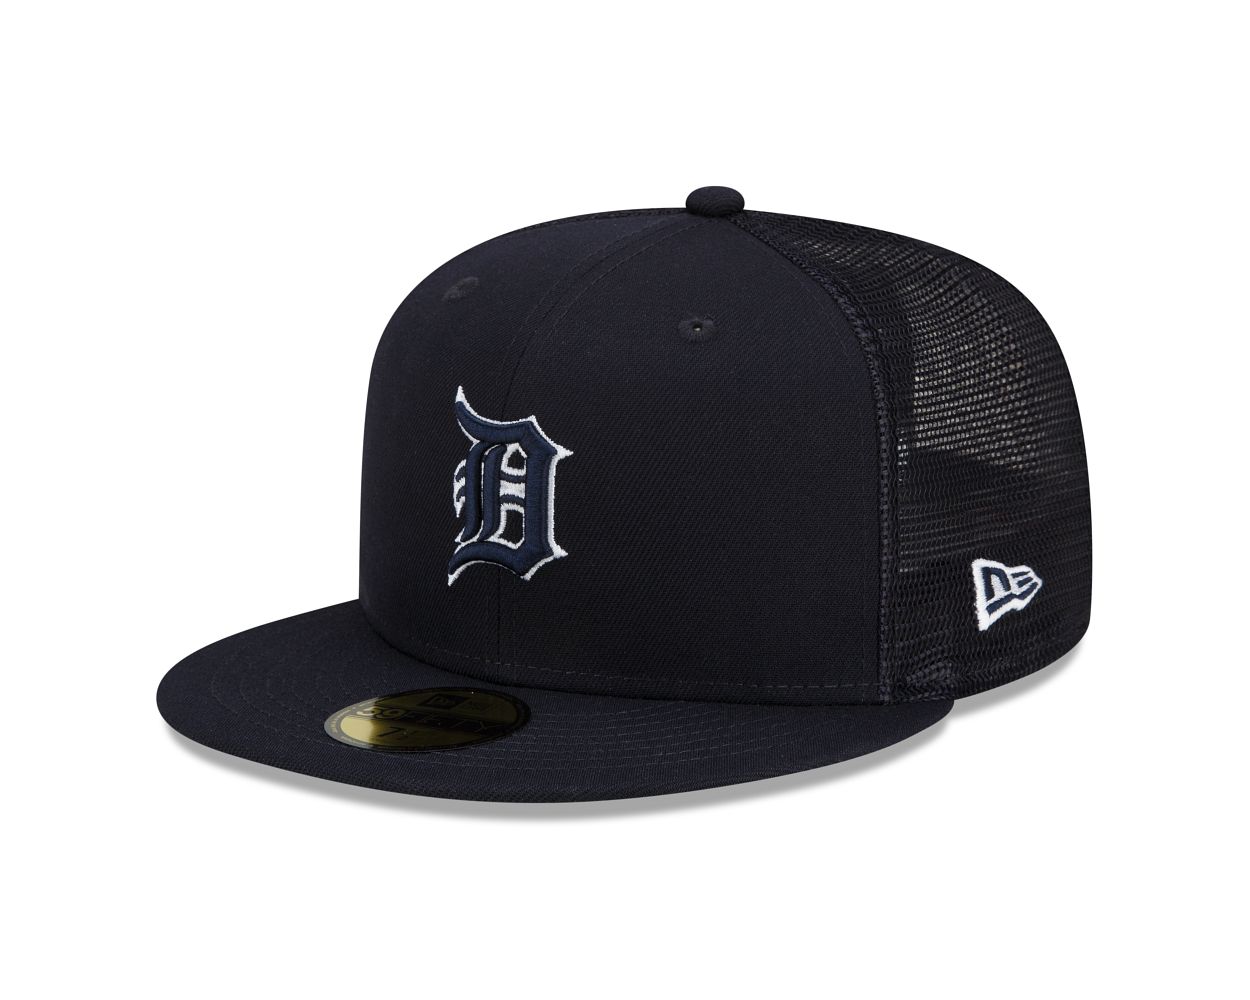 Detroit Tigers Black on Black 59FIFTY Men's Fitted Cap by Vintage Detroit Collection